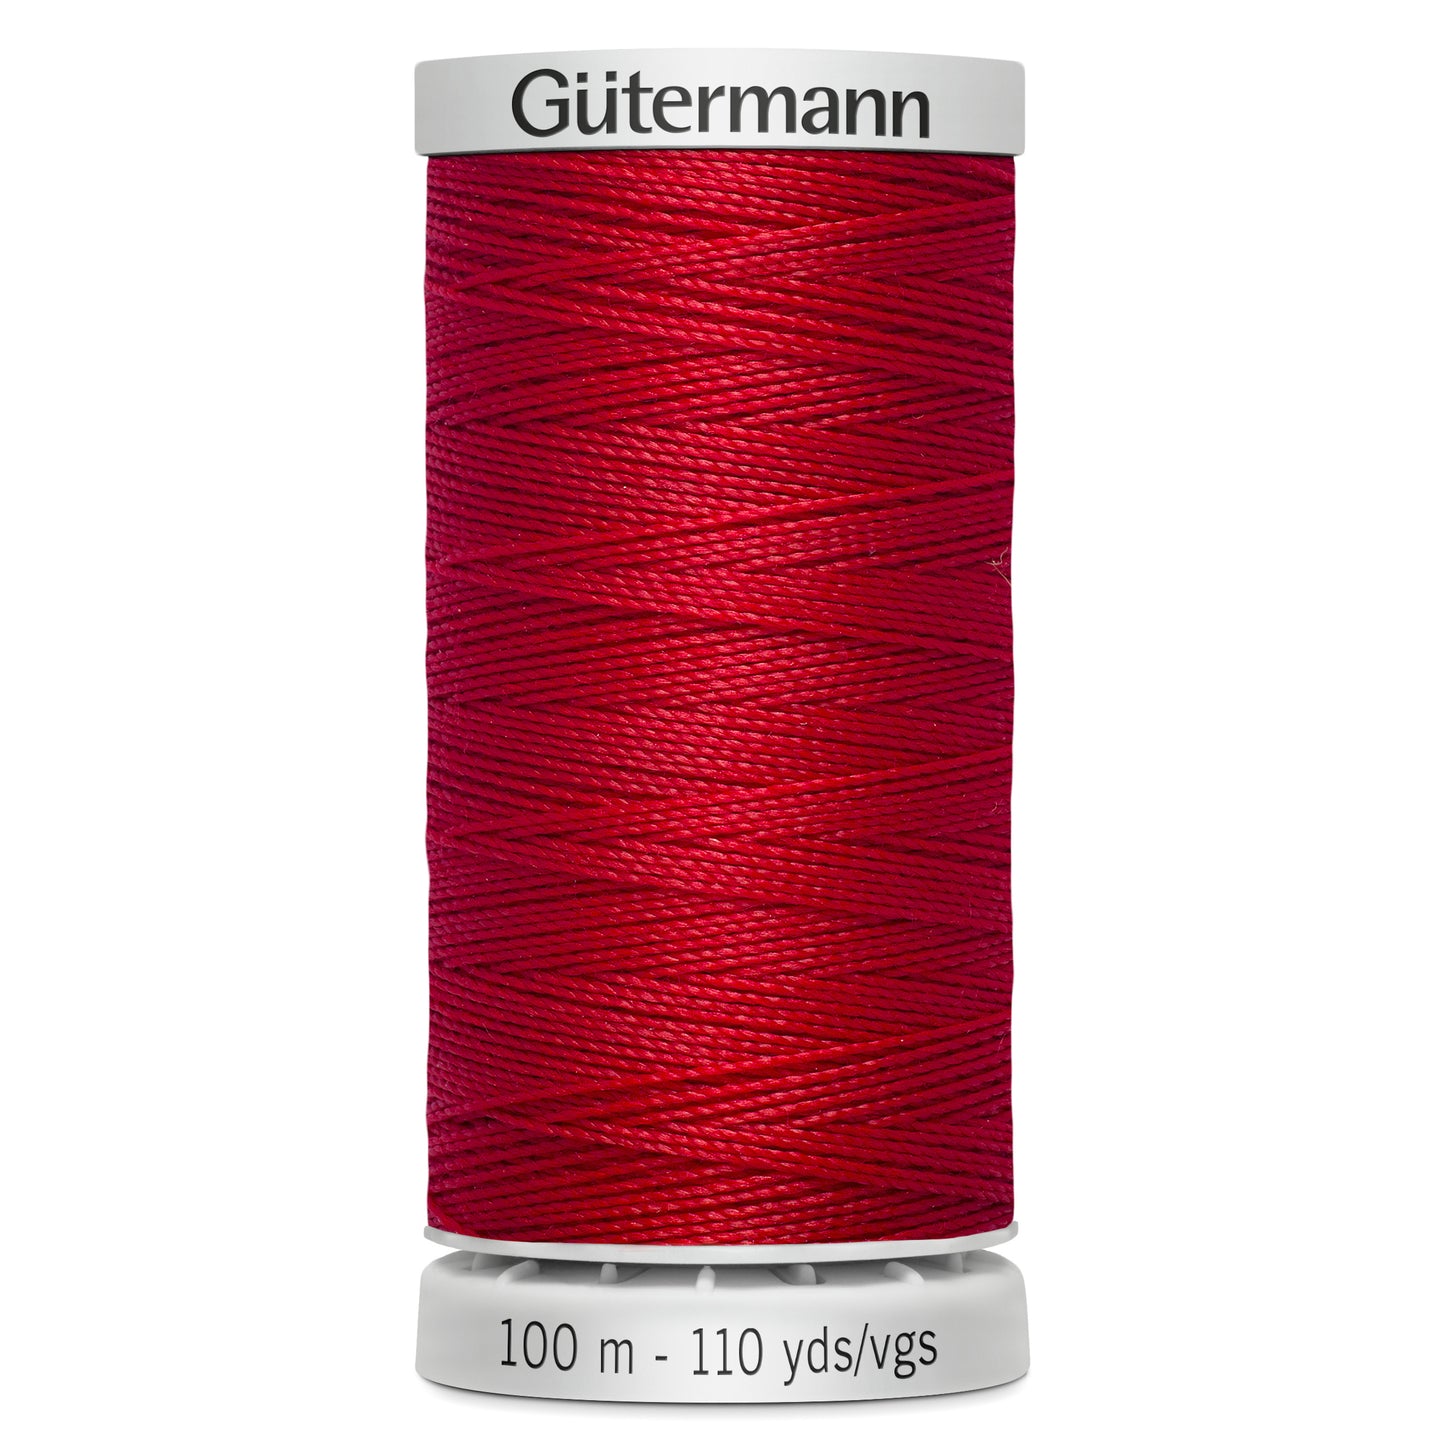 Extra Upholstery Thread - 100m Colour 156